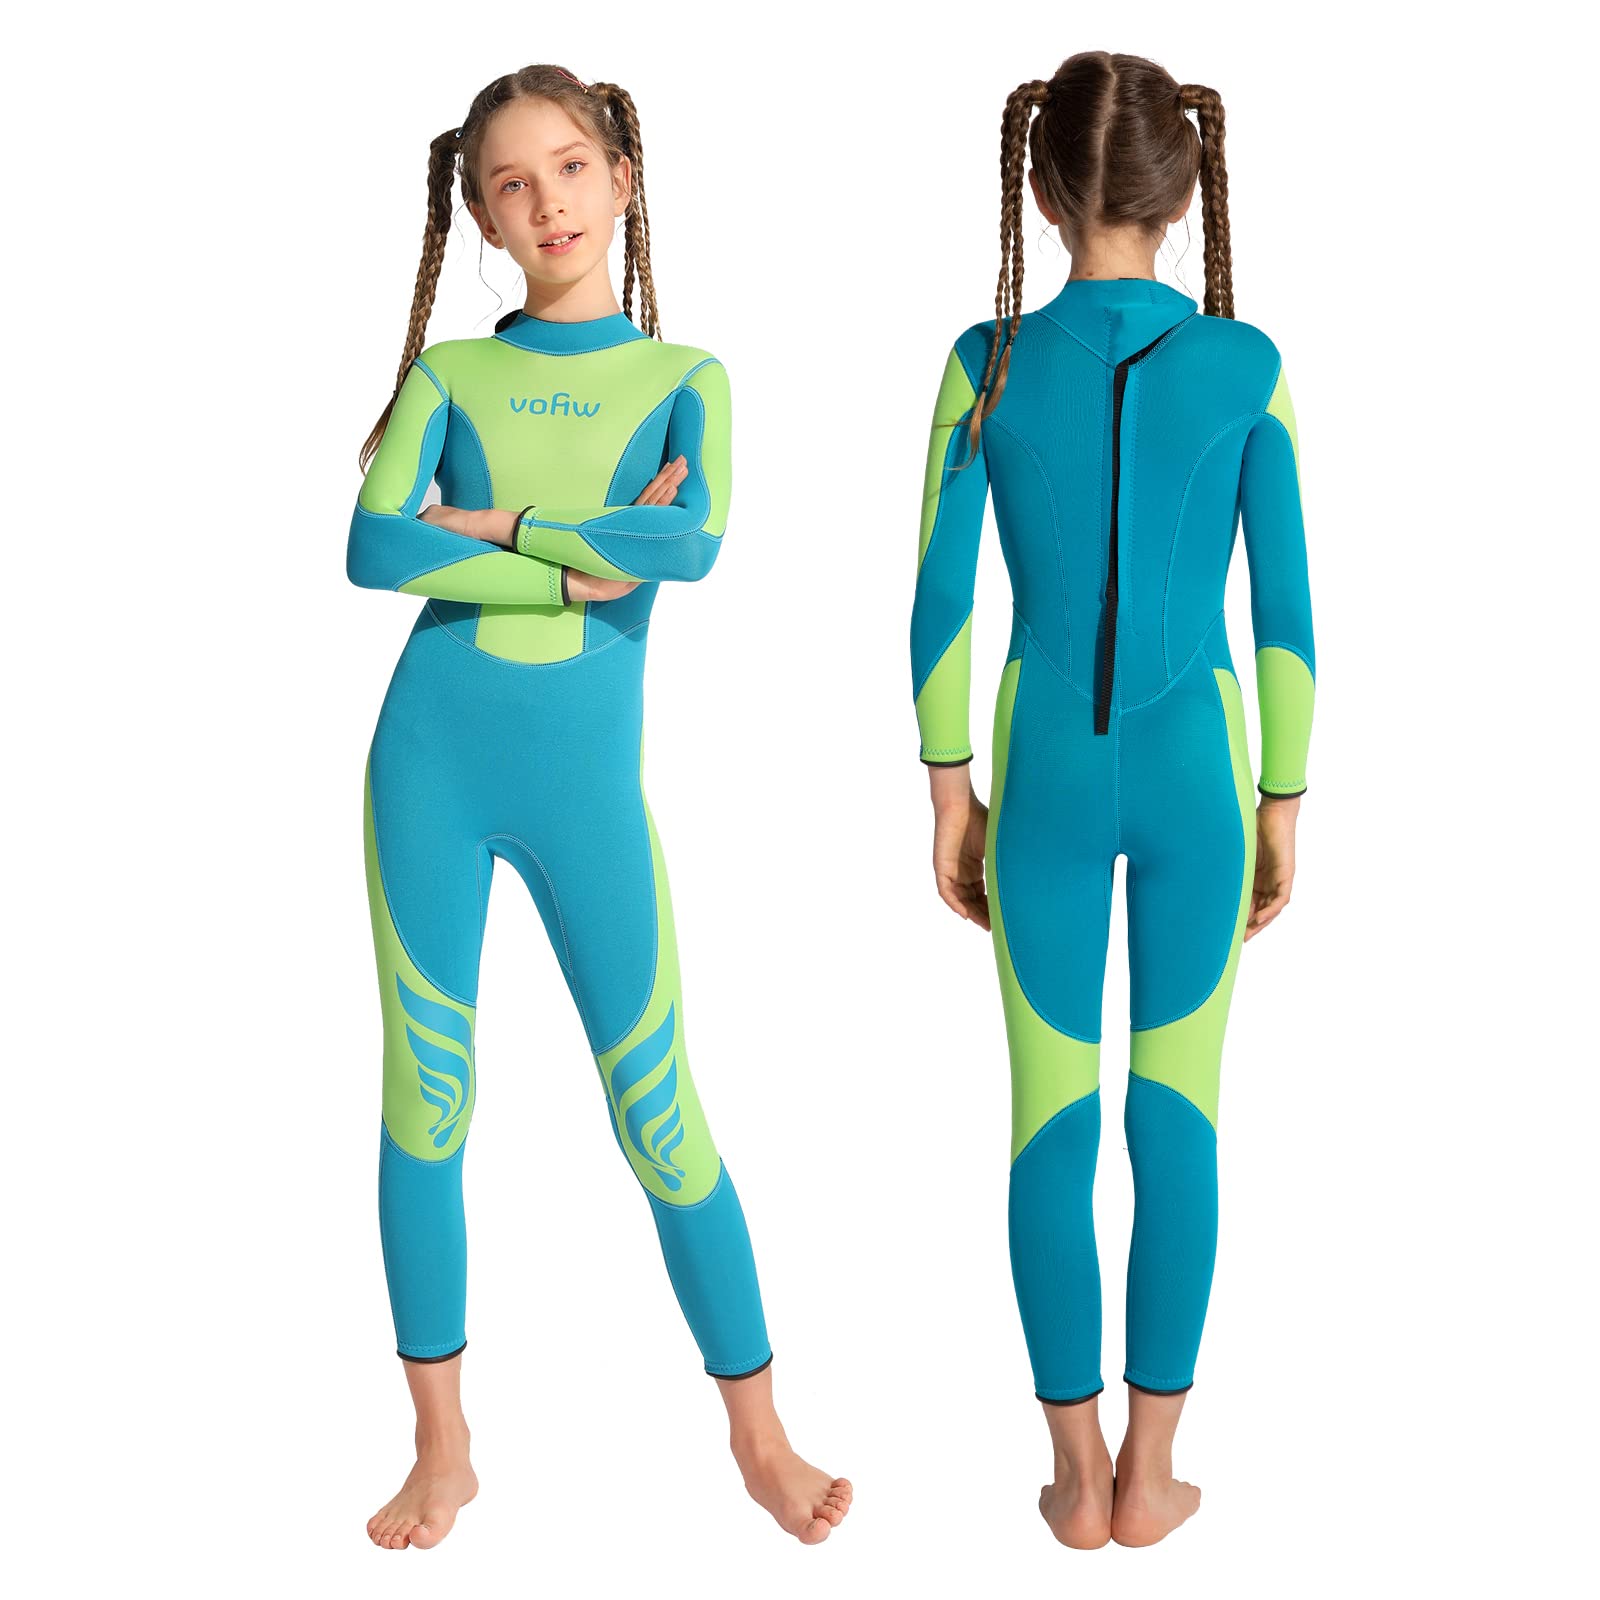 vofiw Vofiw Toddler Wetsuit 2t Kids Wetsuits 3mm Neoprene girls Wet Suit  Toddlers Back Zip Wet Suits for Surfing Swimming Diving Snork